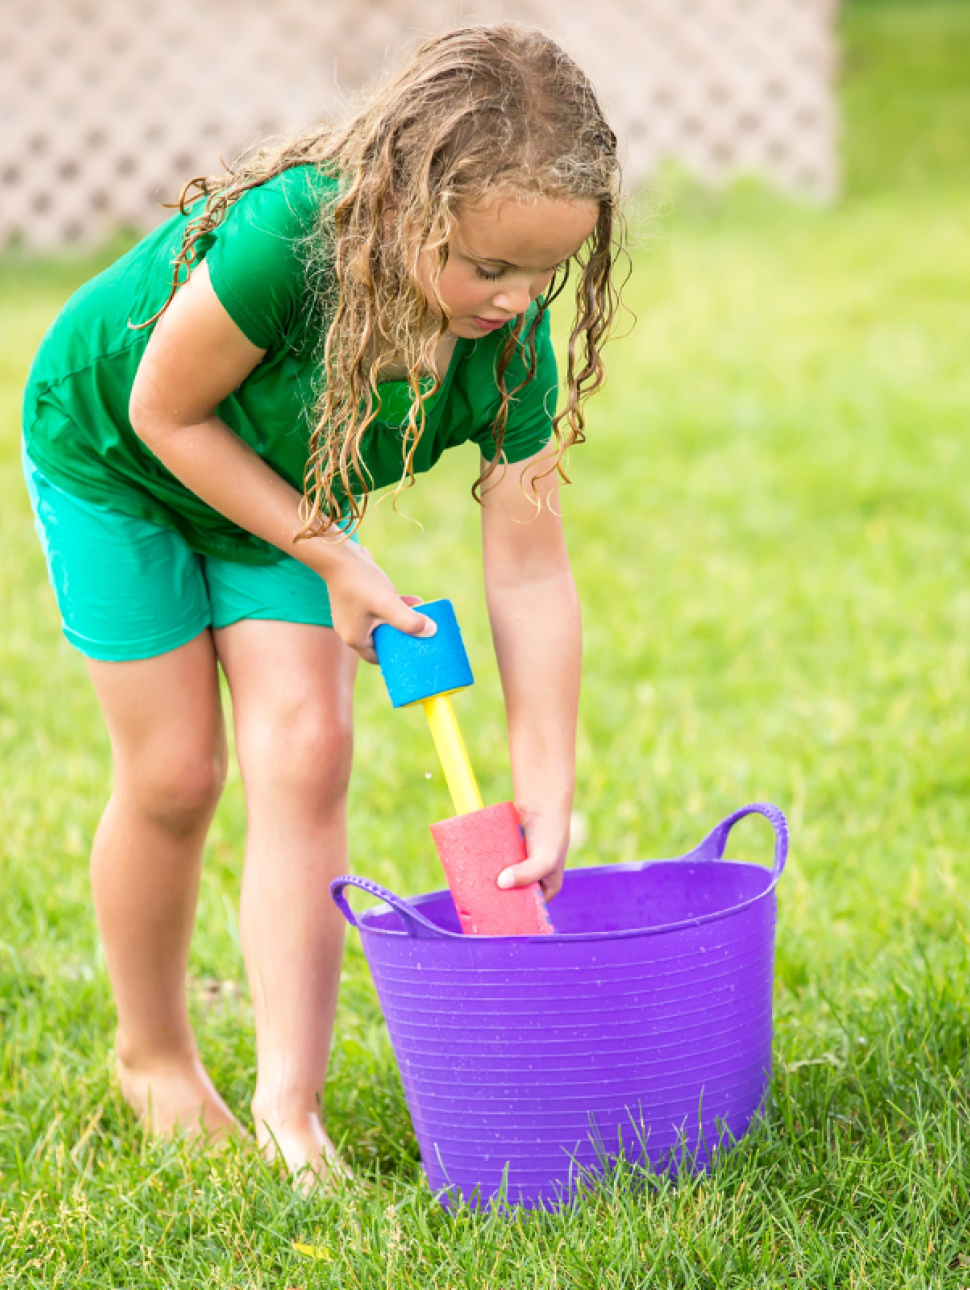 Child holding a water gun, drawing water from a bucket with green grass and a tree in the background